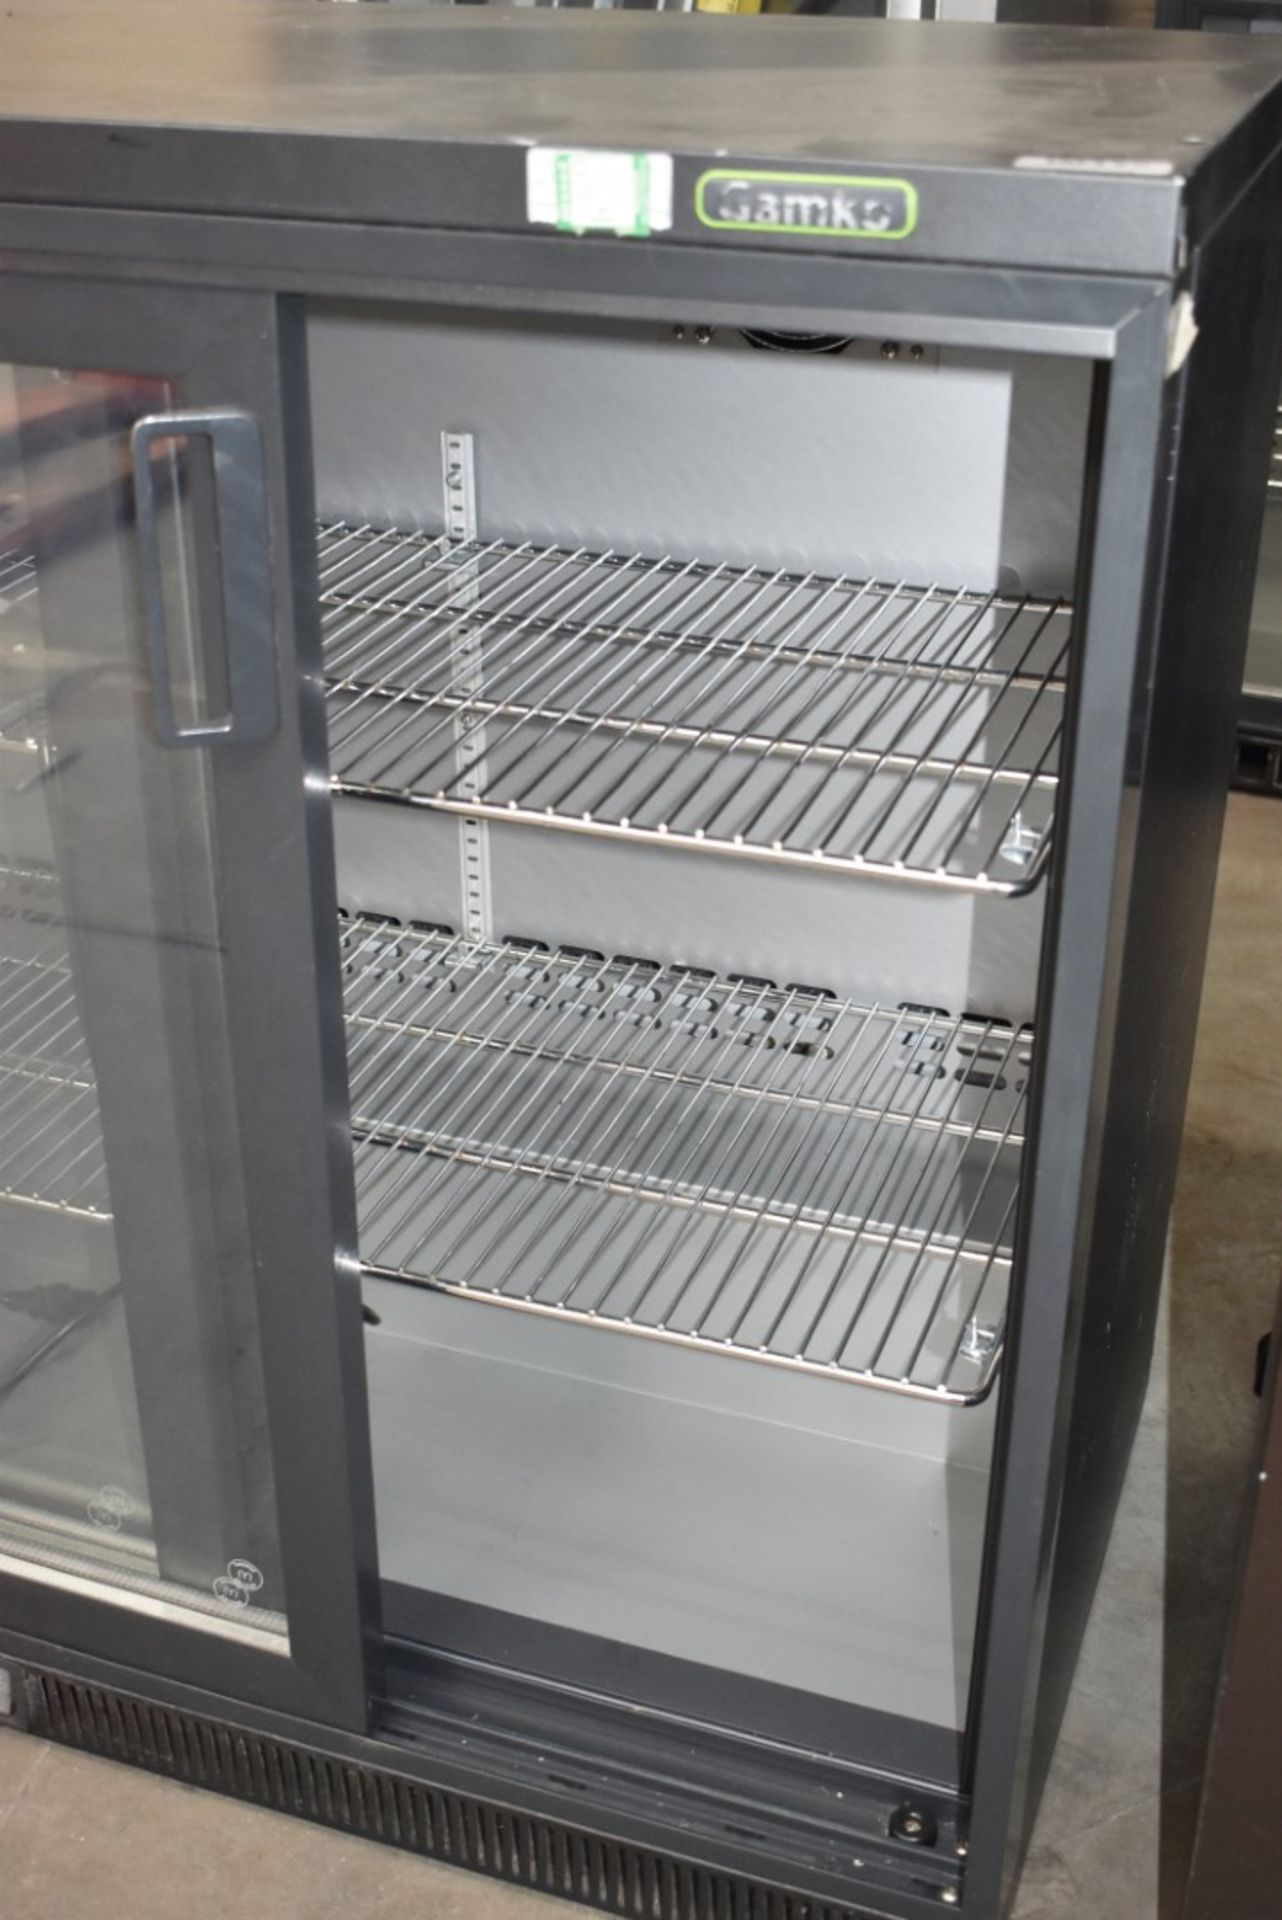 1 x Gamko MG2 Two Door Backbar Bottle Cooler - Dimensions: H92 x W90 x D53 cms - Ref: IM175 WH4 - - Image 2 of 5